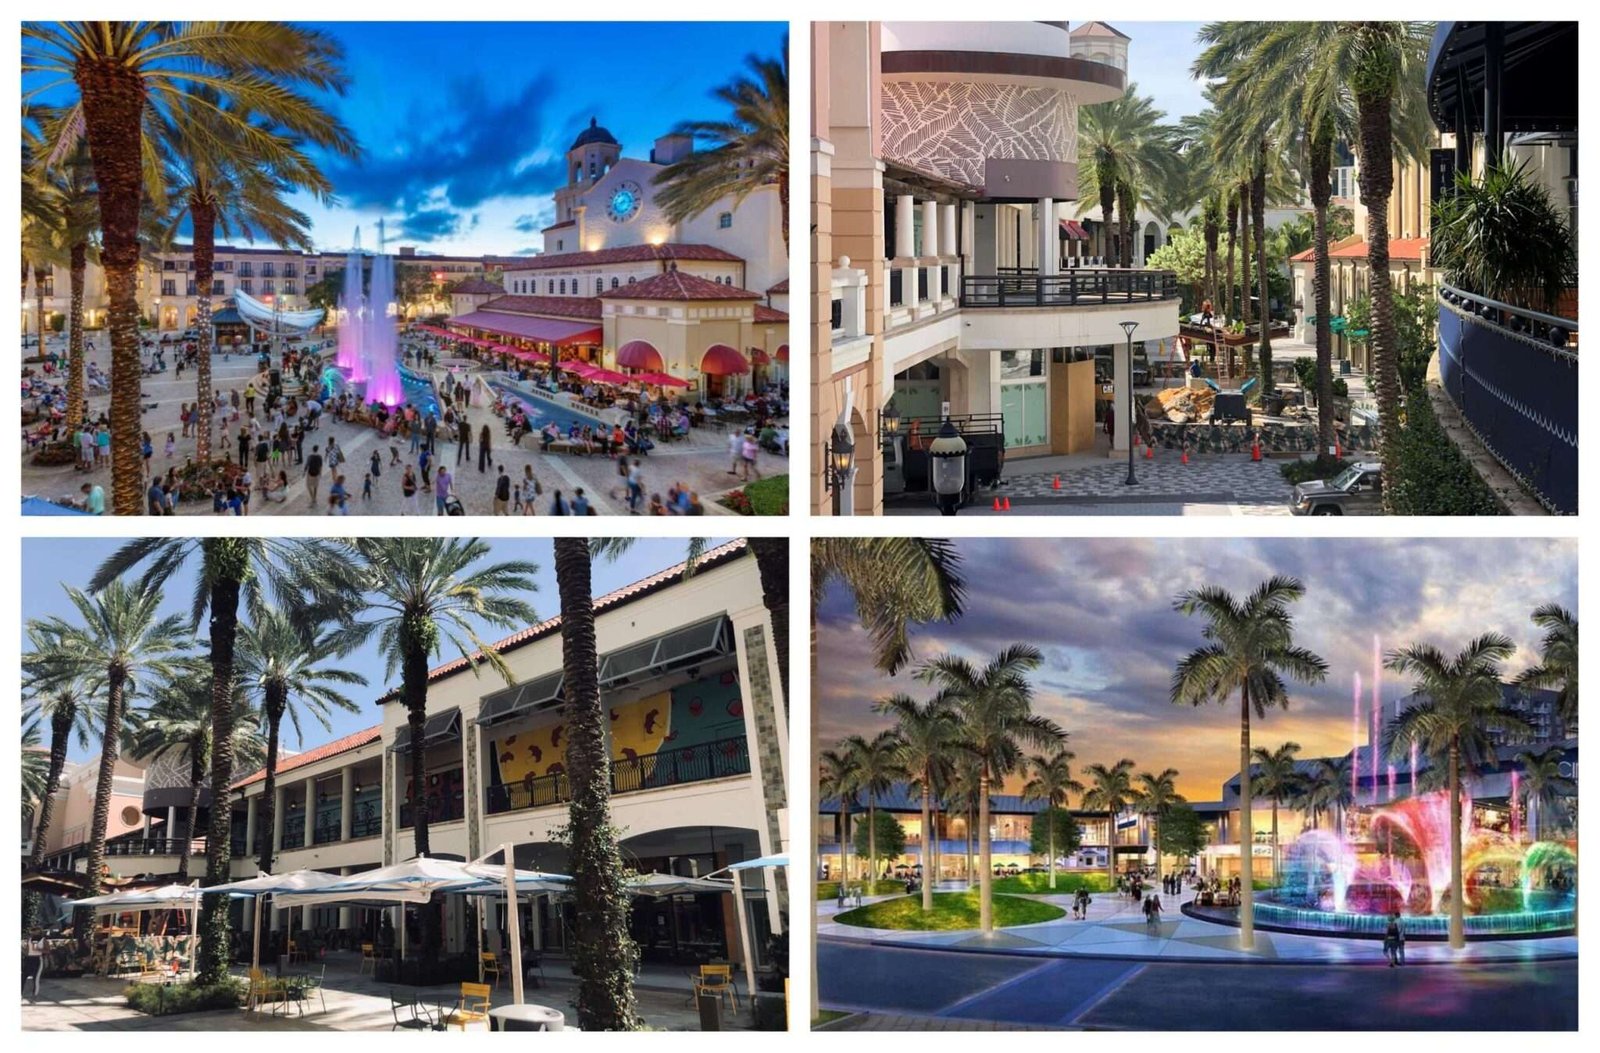 A Collage Of Pictures Of A Shopping Mall With Palm Trees And Palm Trees.